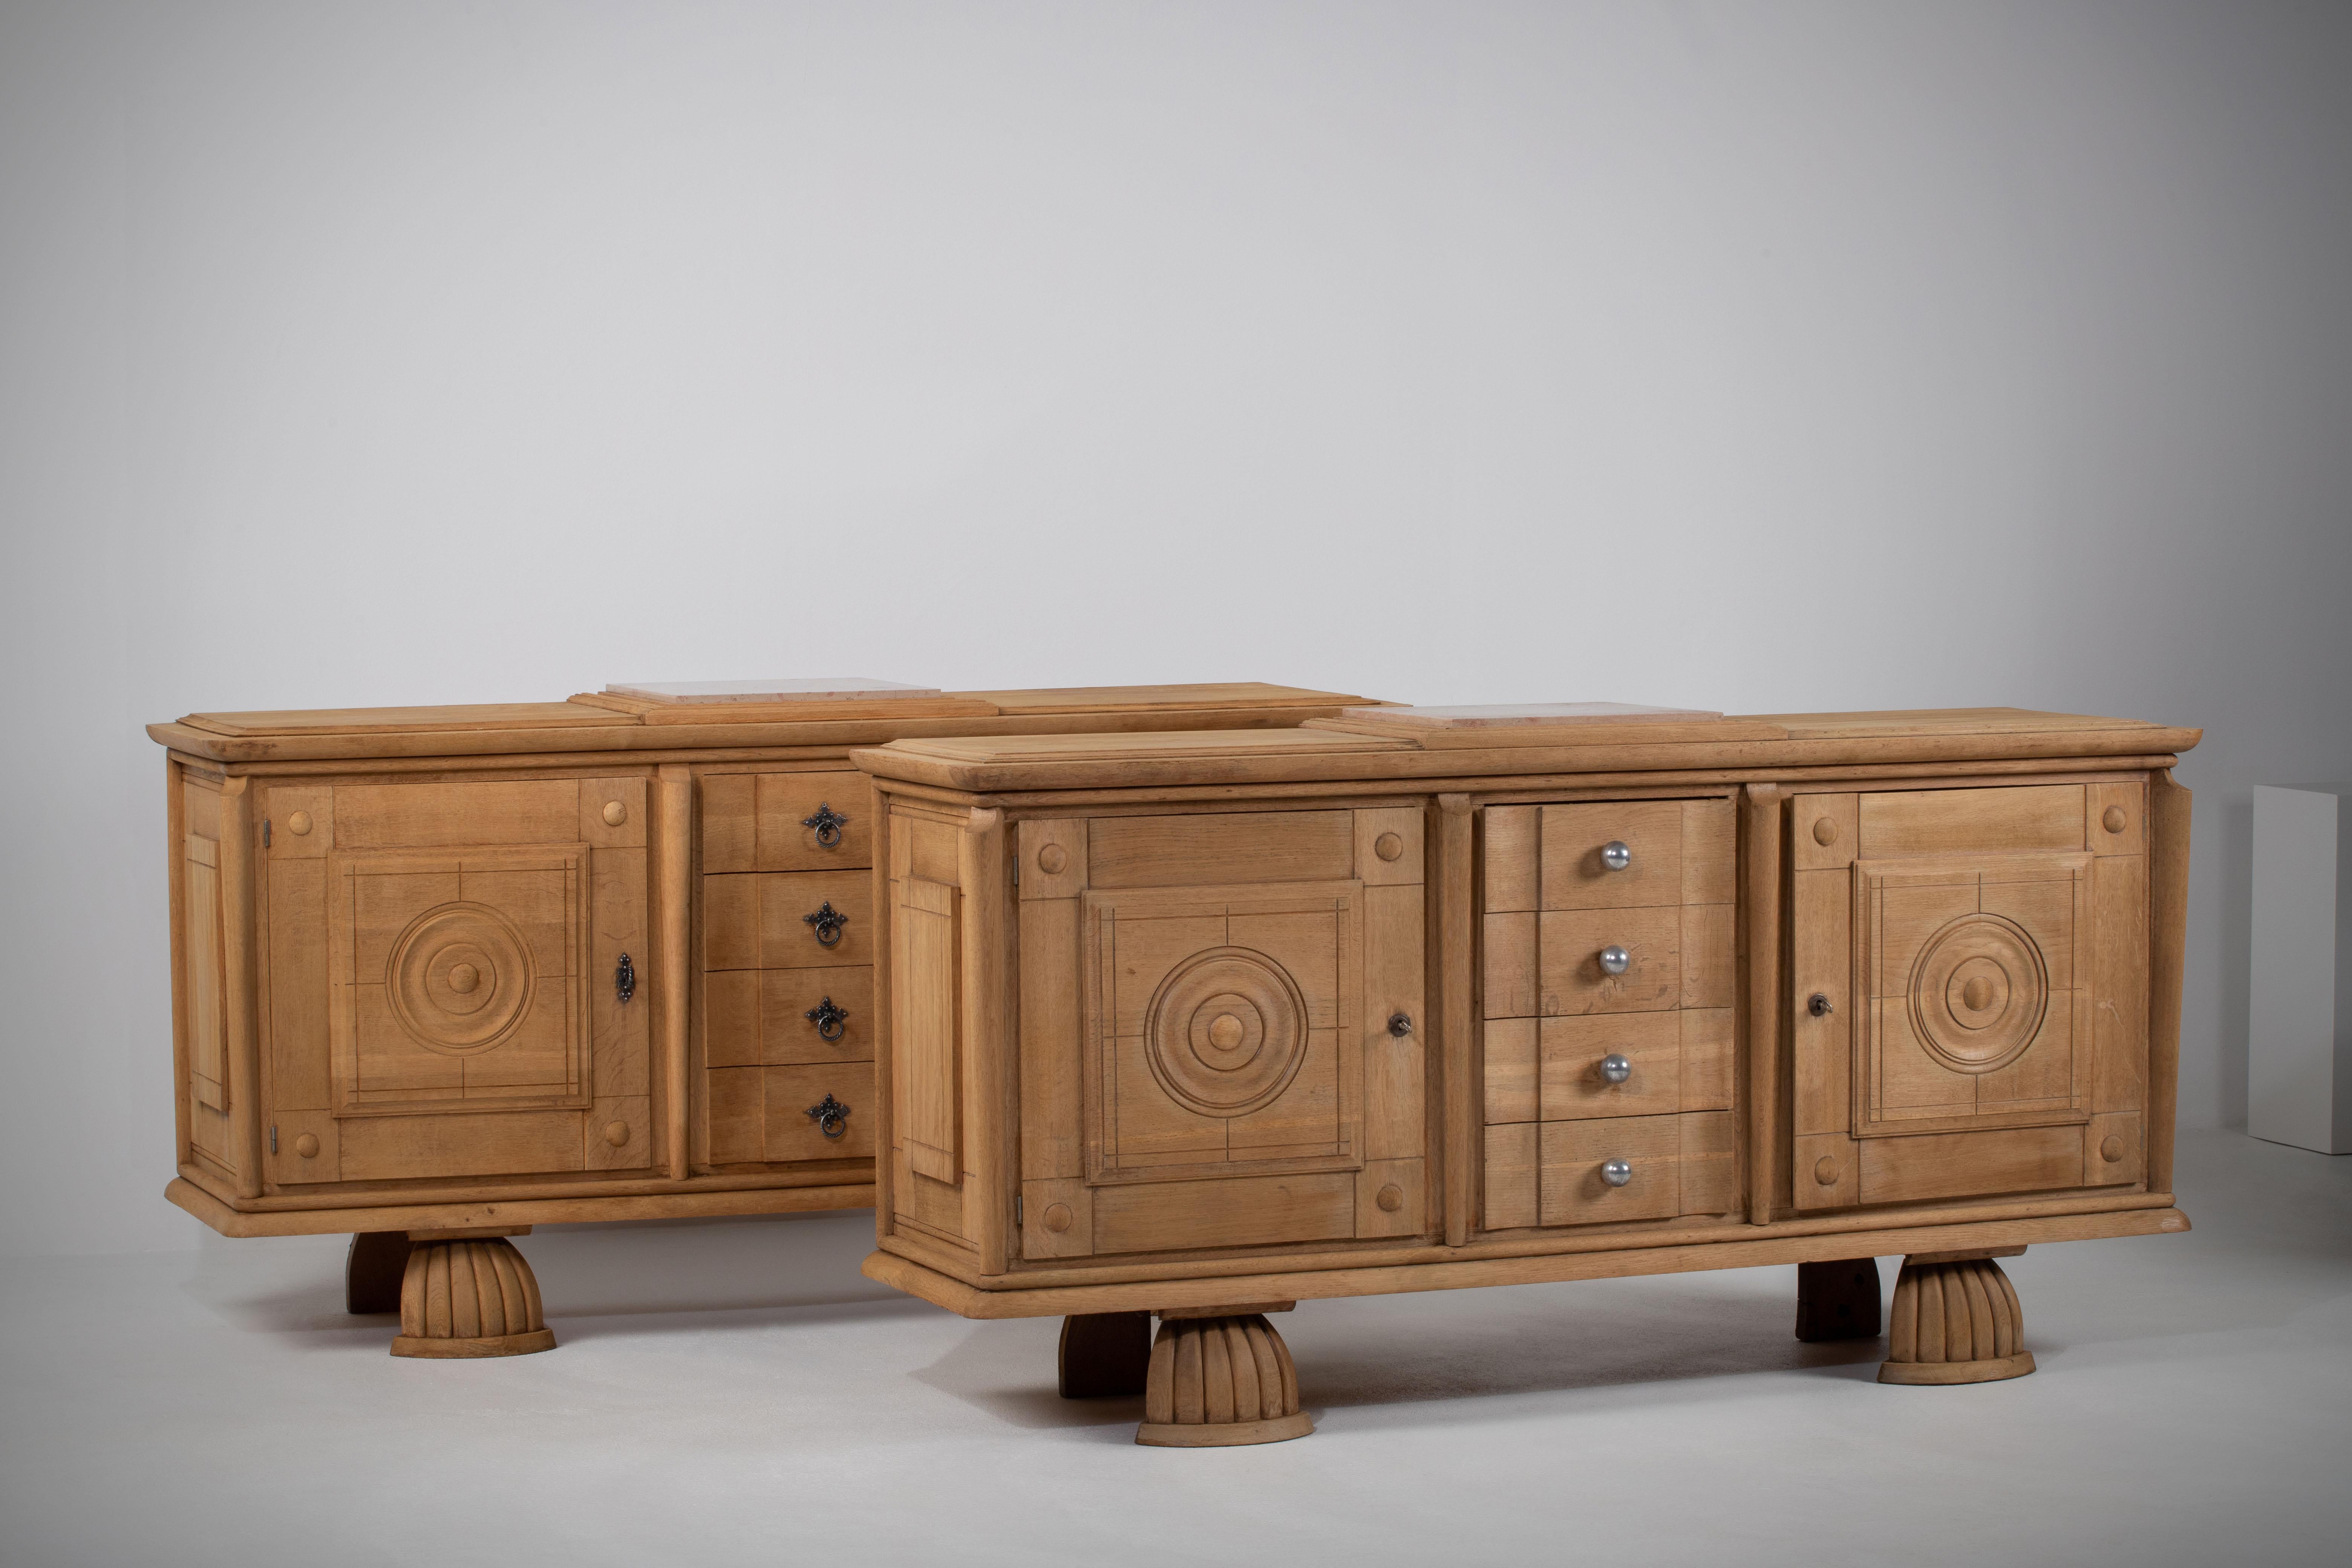 Pair of credenzas, solid oak, France, 1940s.
Large Art Deco brutalist sideboard.
The credenza consists of two storage facilities with the center drawers.
The refined wooden structures on the doors create a striking combination with the otherwise